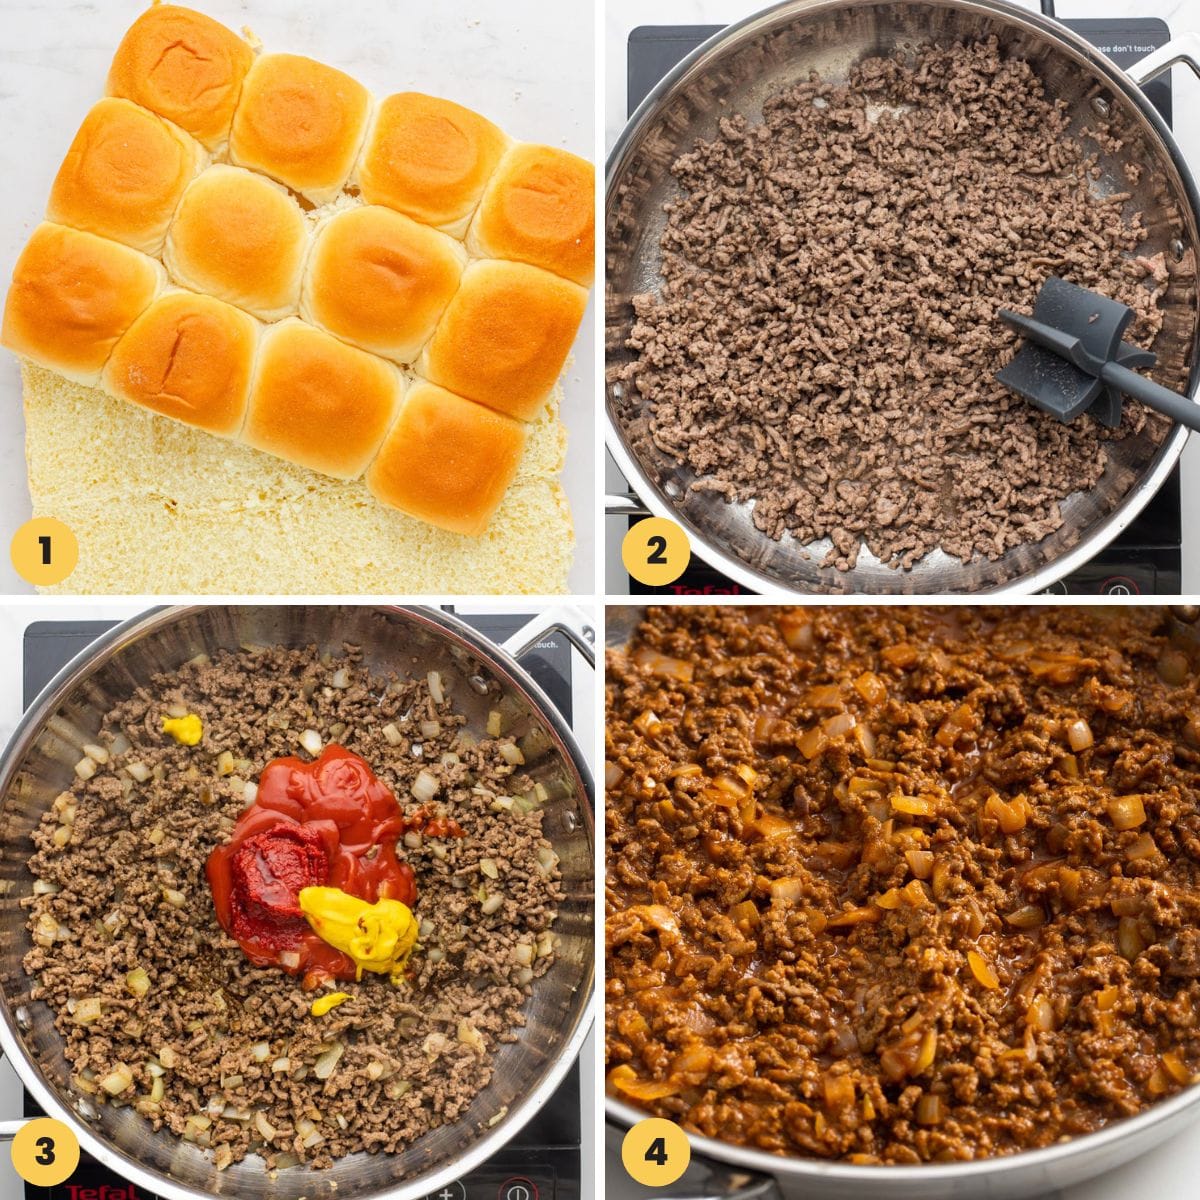 A four step collage showing a full container of Hawaiian rolls and how to make Sloppy joe filling.